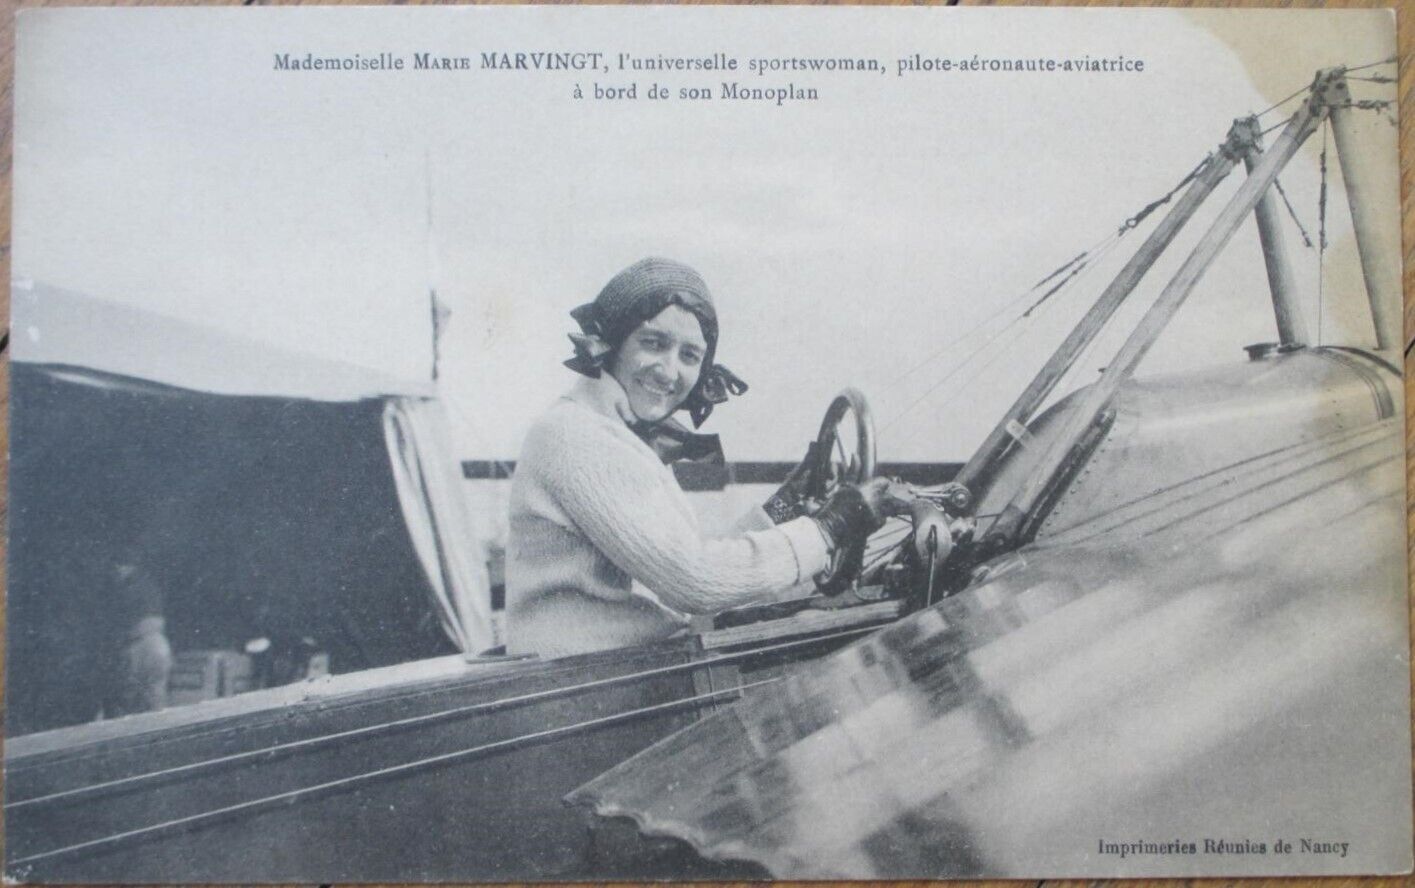 French Aviation 1910 Postcard, Female Aviator Marie Marvingt in Airplane, Pilot